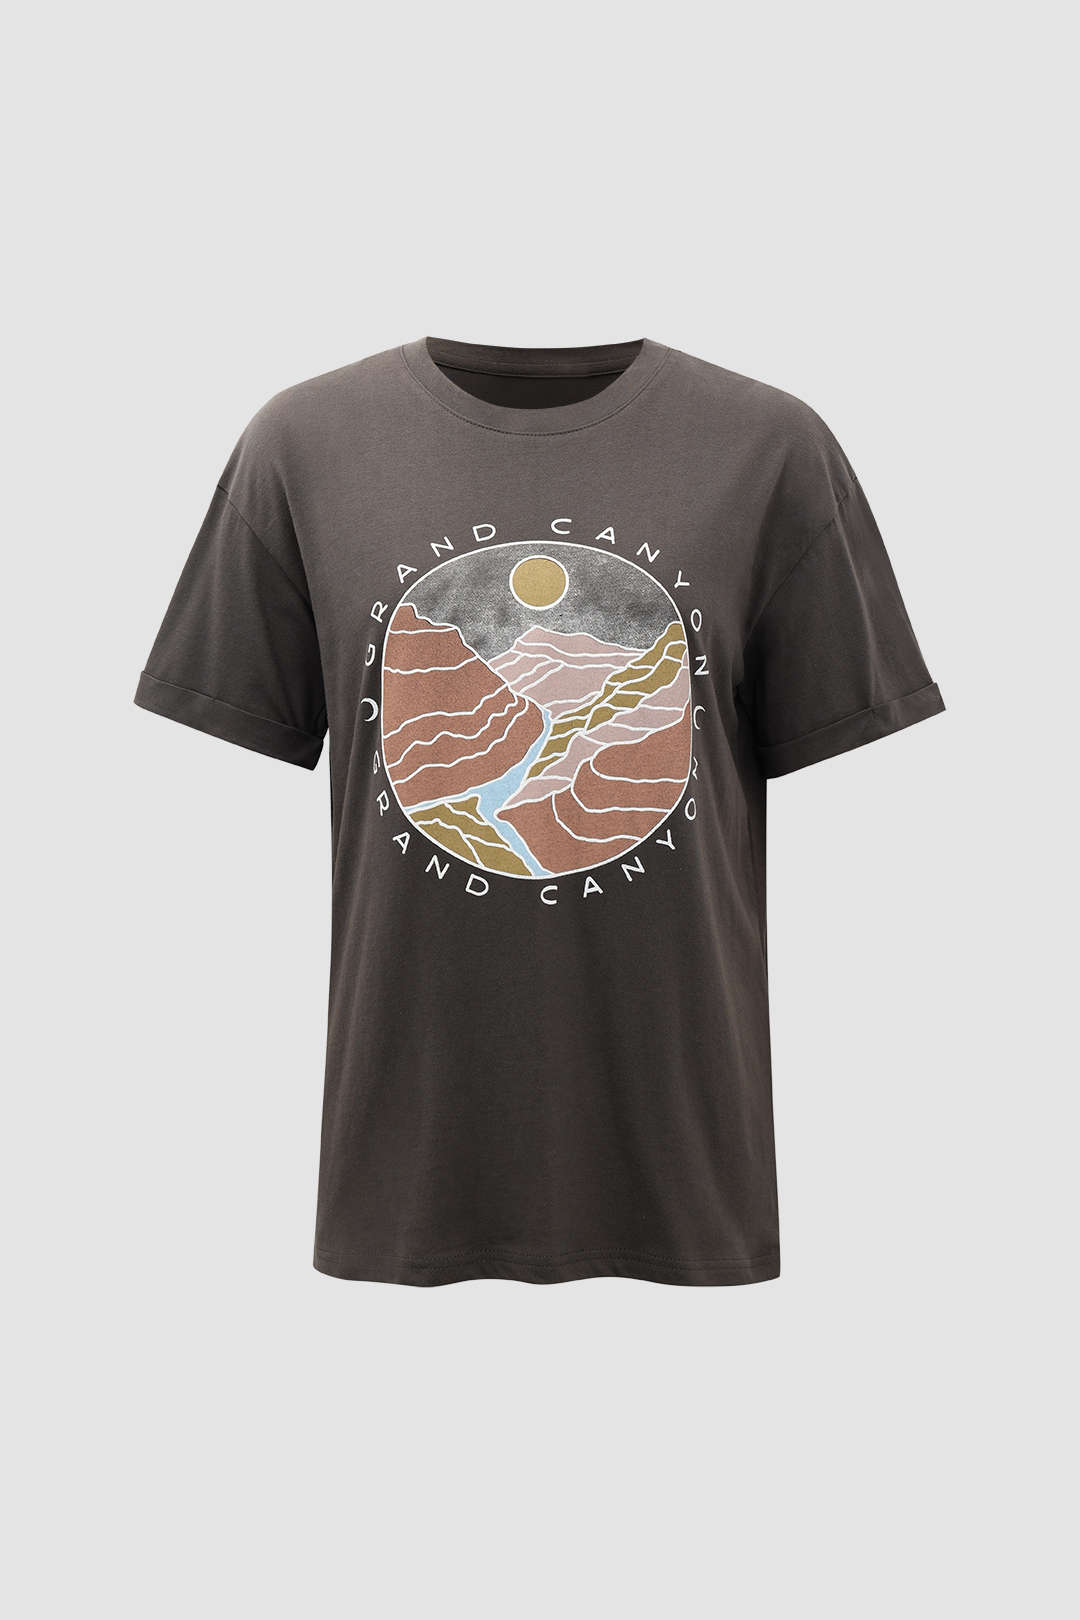 Canyon Graphic Rolled Sleeve T-Shirt